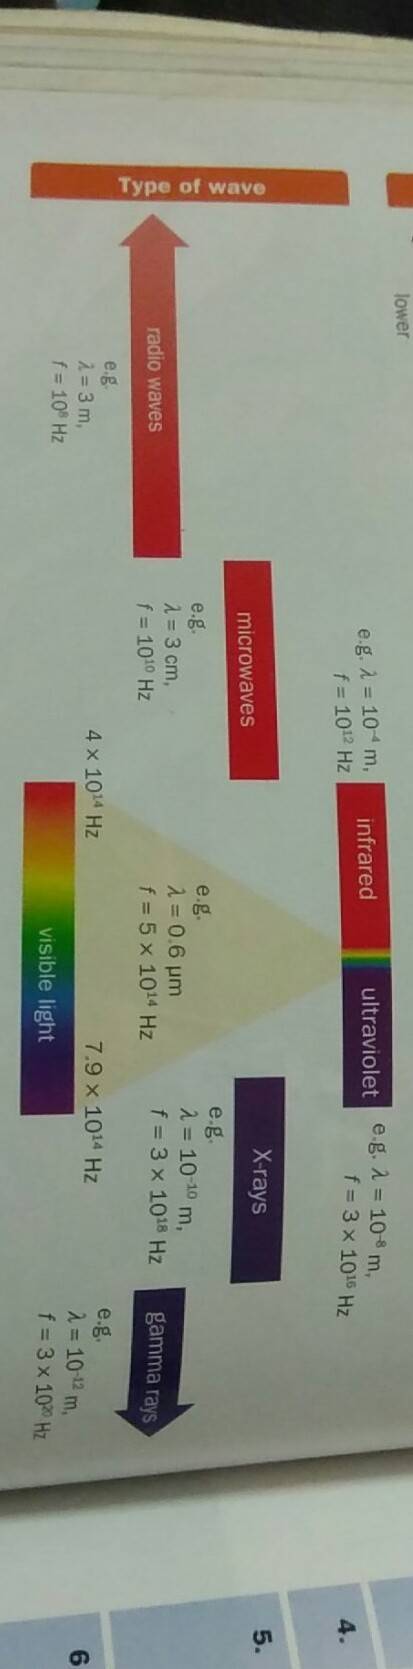 Ultraviolet and infrared radiations are members of the electromagnetic spectrum what are the two pro